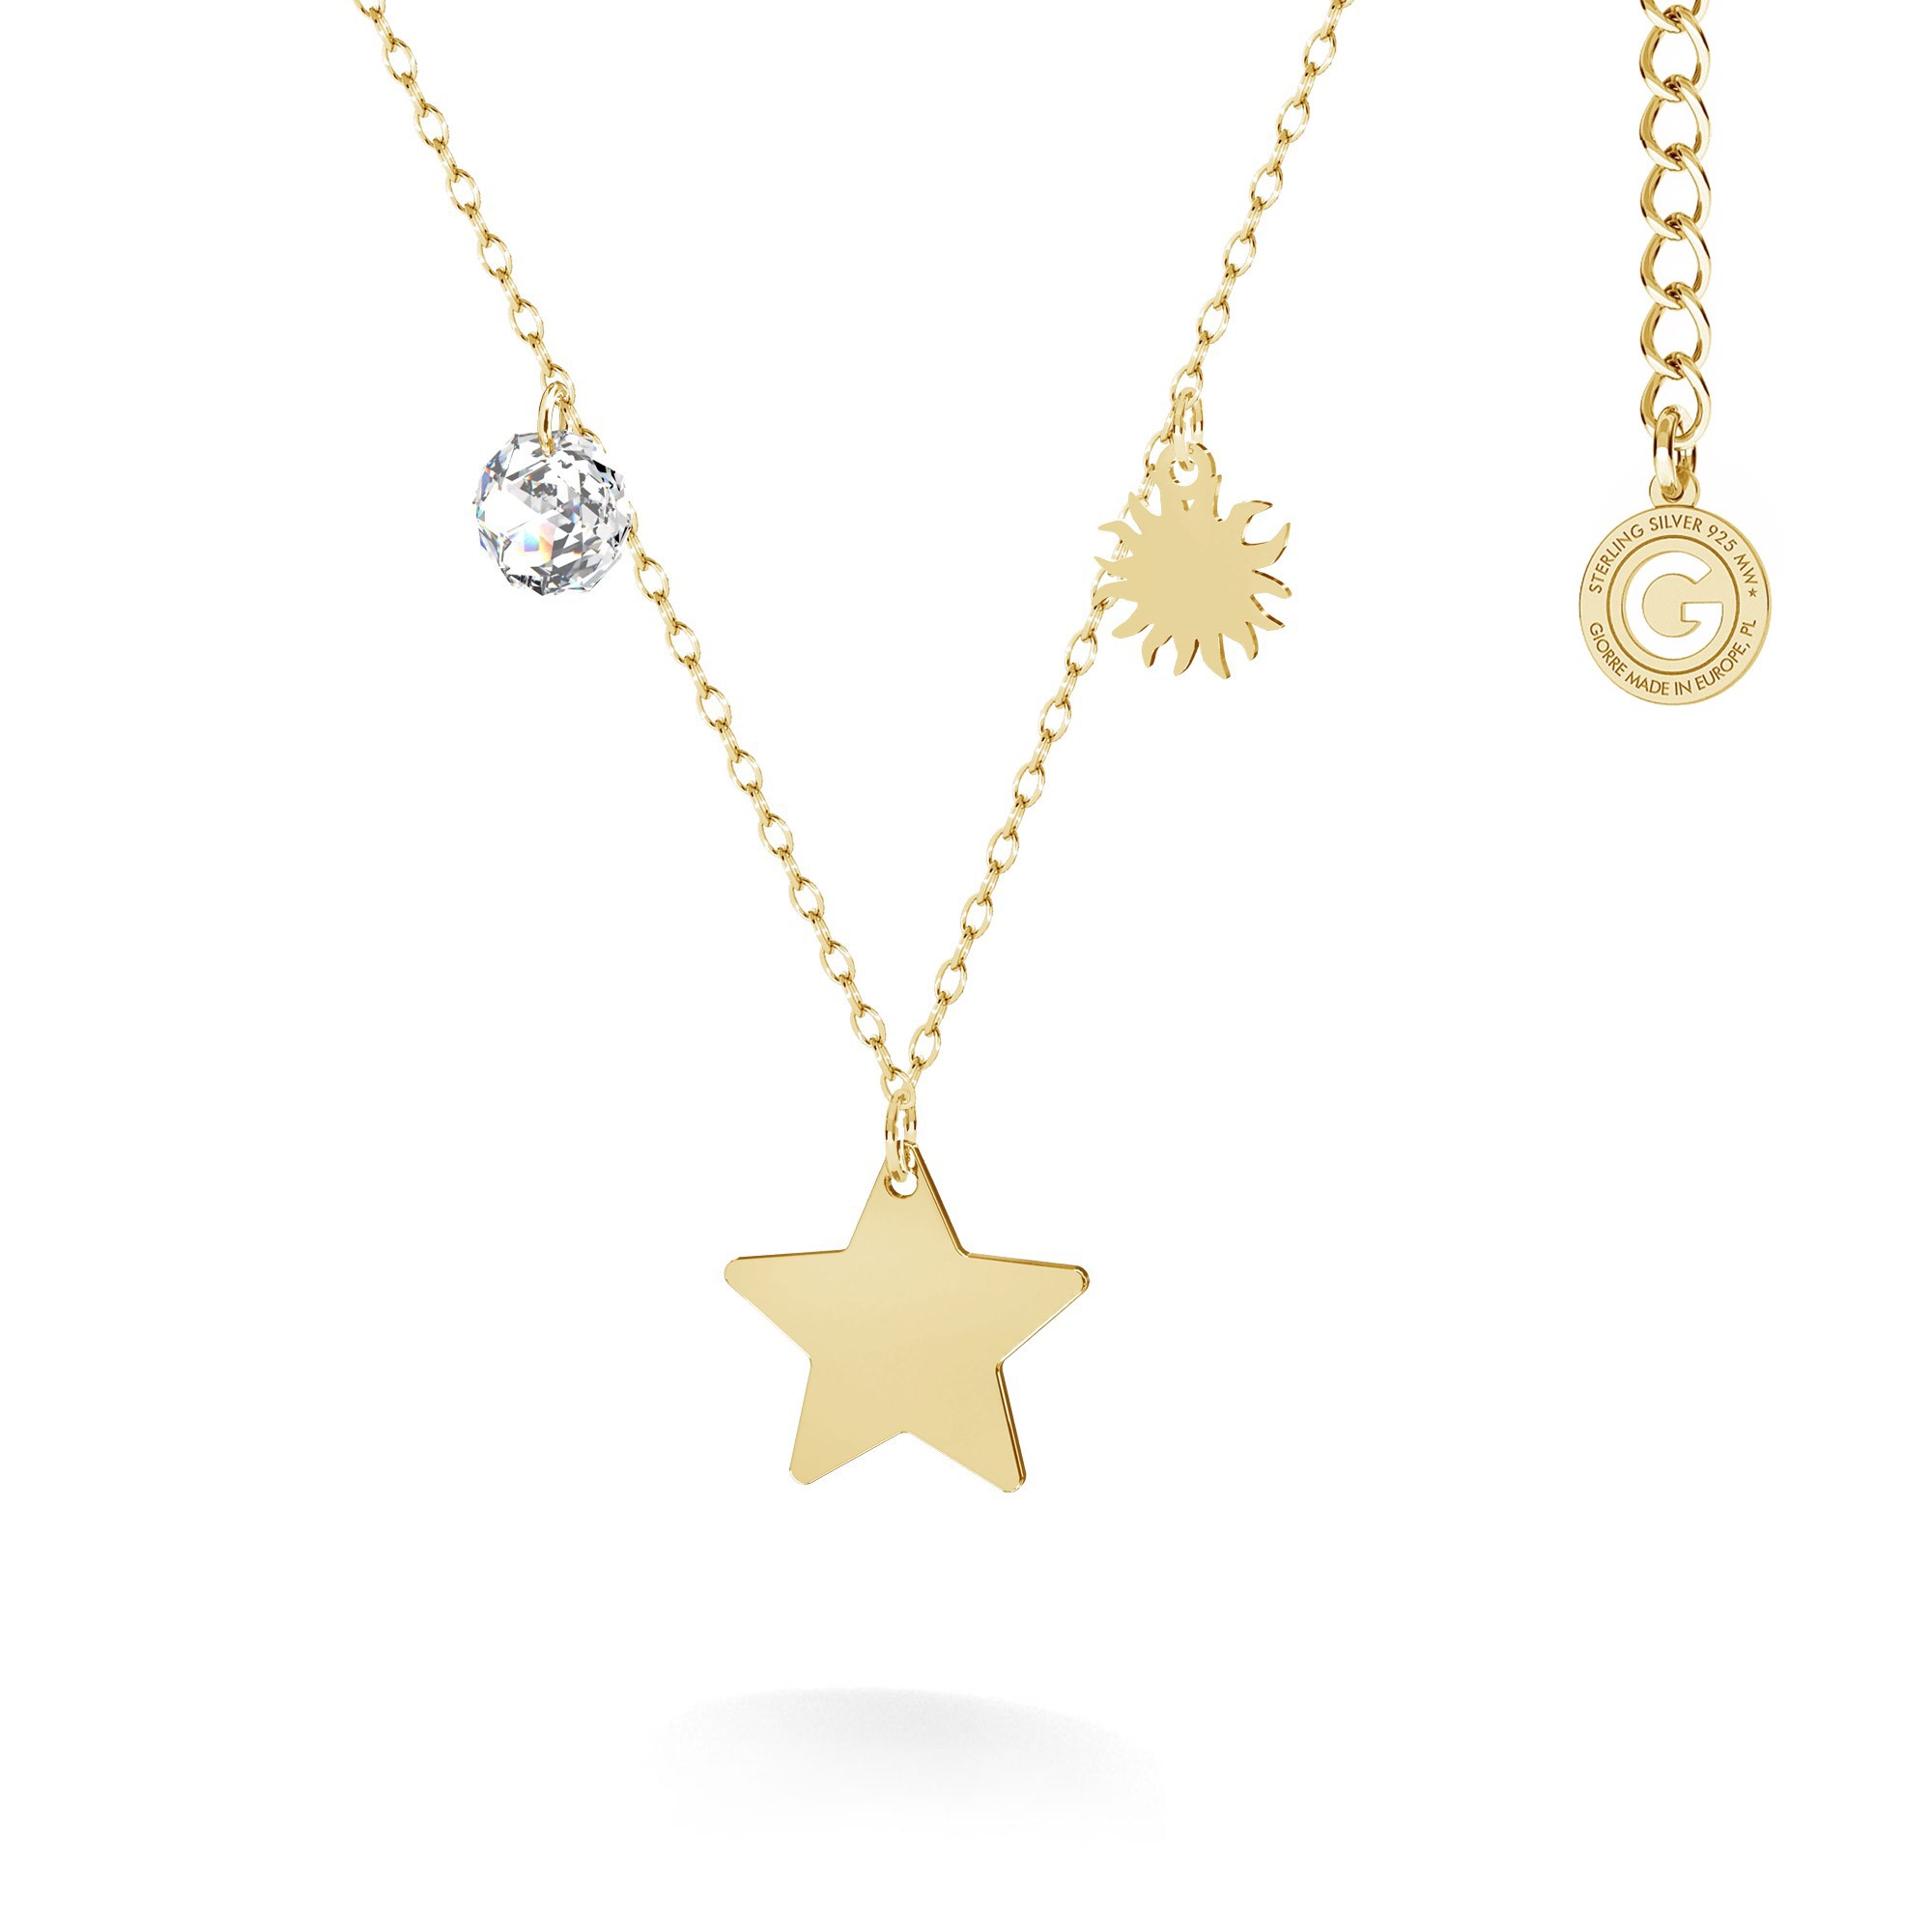 Letter necklace with star pendant, Swarovski crystal, T°ra'vel'' , silver 925